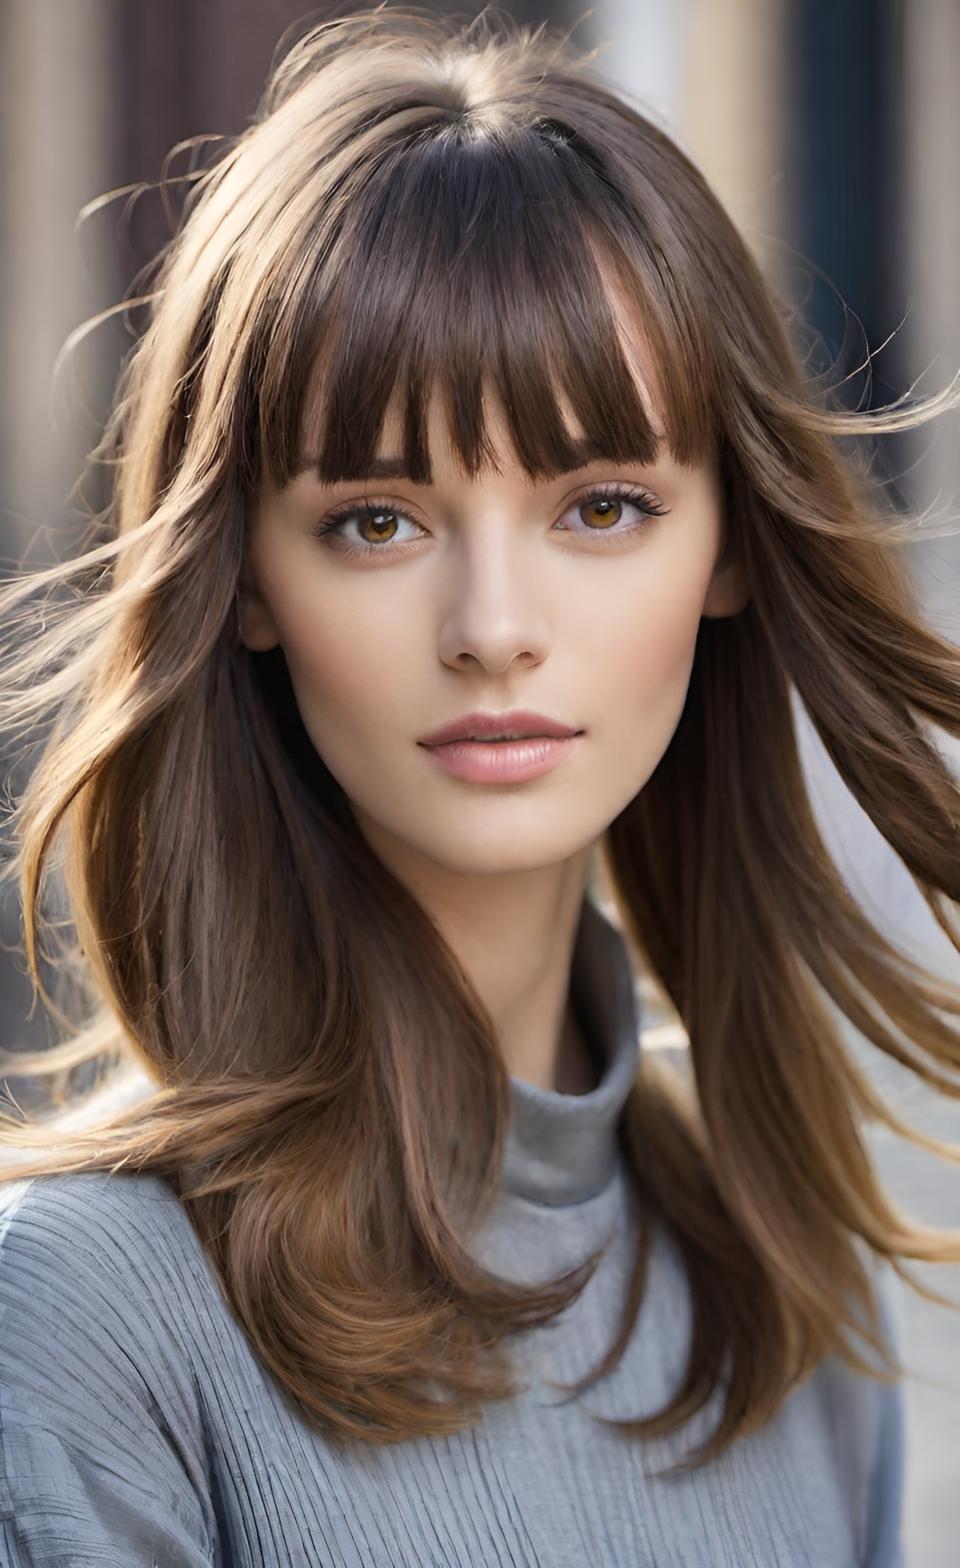 Wispy Bangs For Long Hair: Styling Tips for Gorgeous Braids